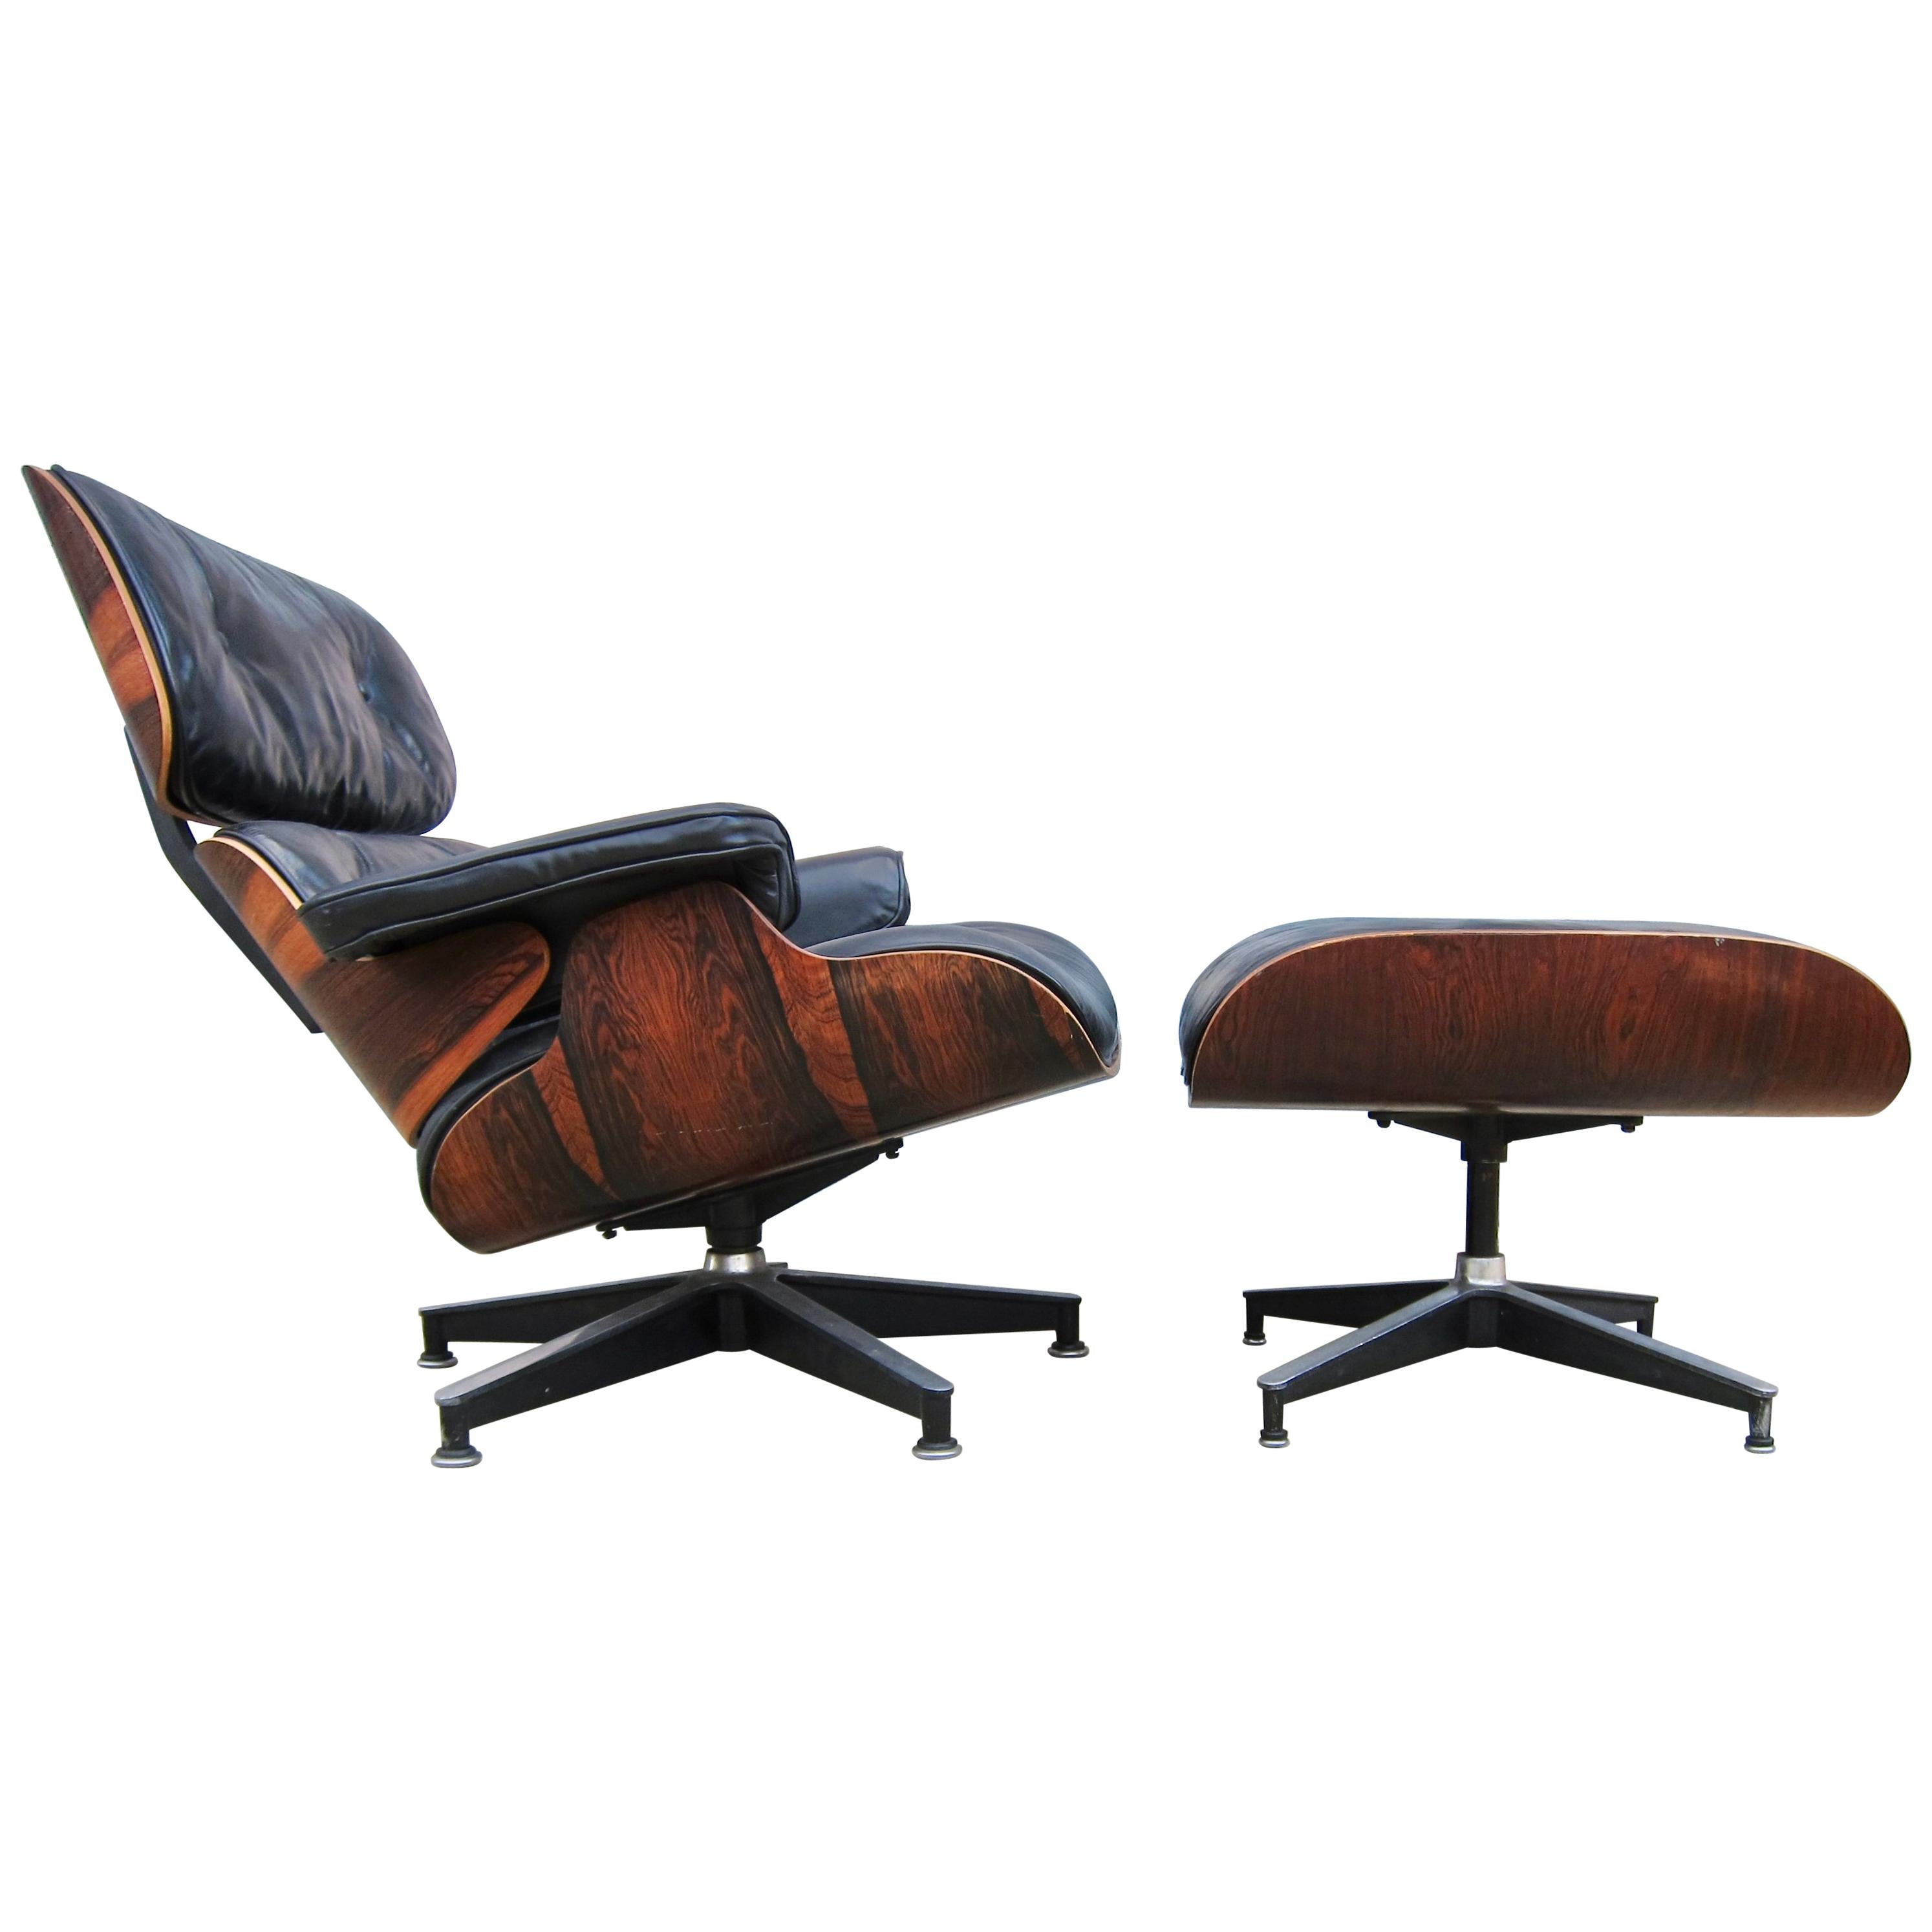 Spectacular Herman Miller Eames Lounge Chair and Ottoman